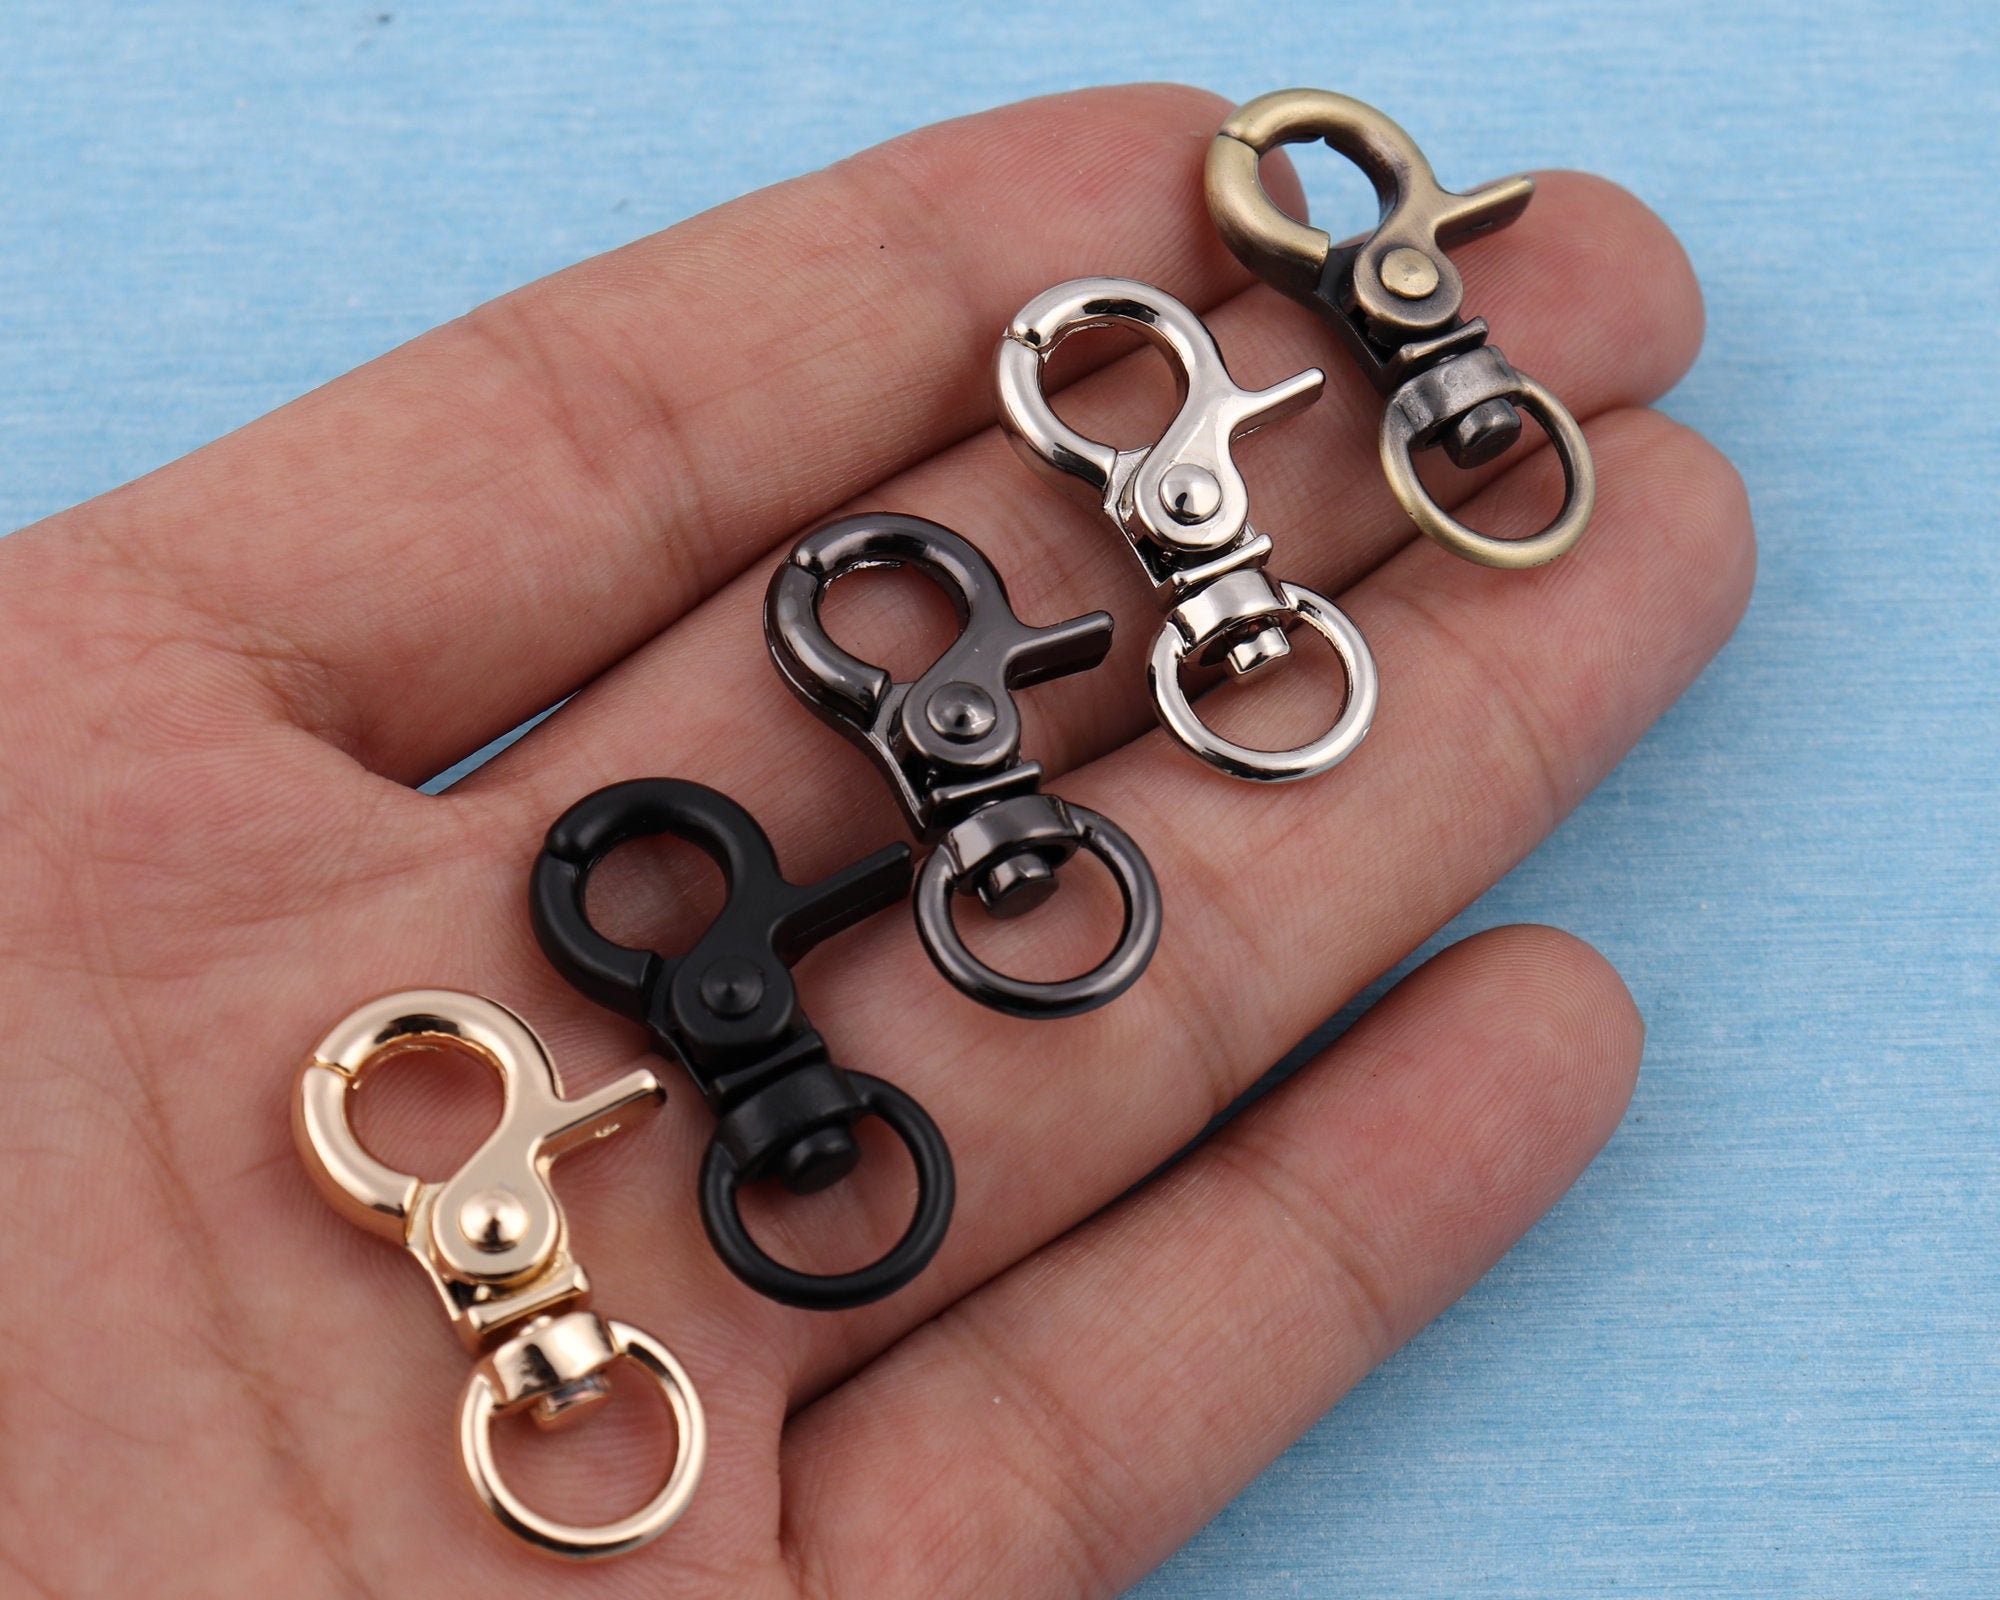 Buy 1.25 Inch Swivel Snap Hook, Antique Brass Finish, 6 Pack, 32 Mm Oval  Gate Purse Clip, Handbag Bag Making Hardware, 1-1/4 Inch, SNP-AA060 Online  in India 